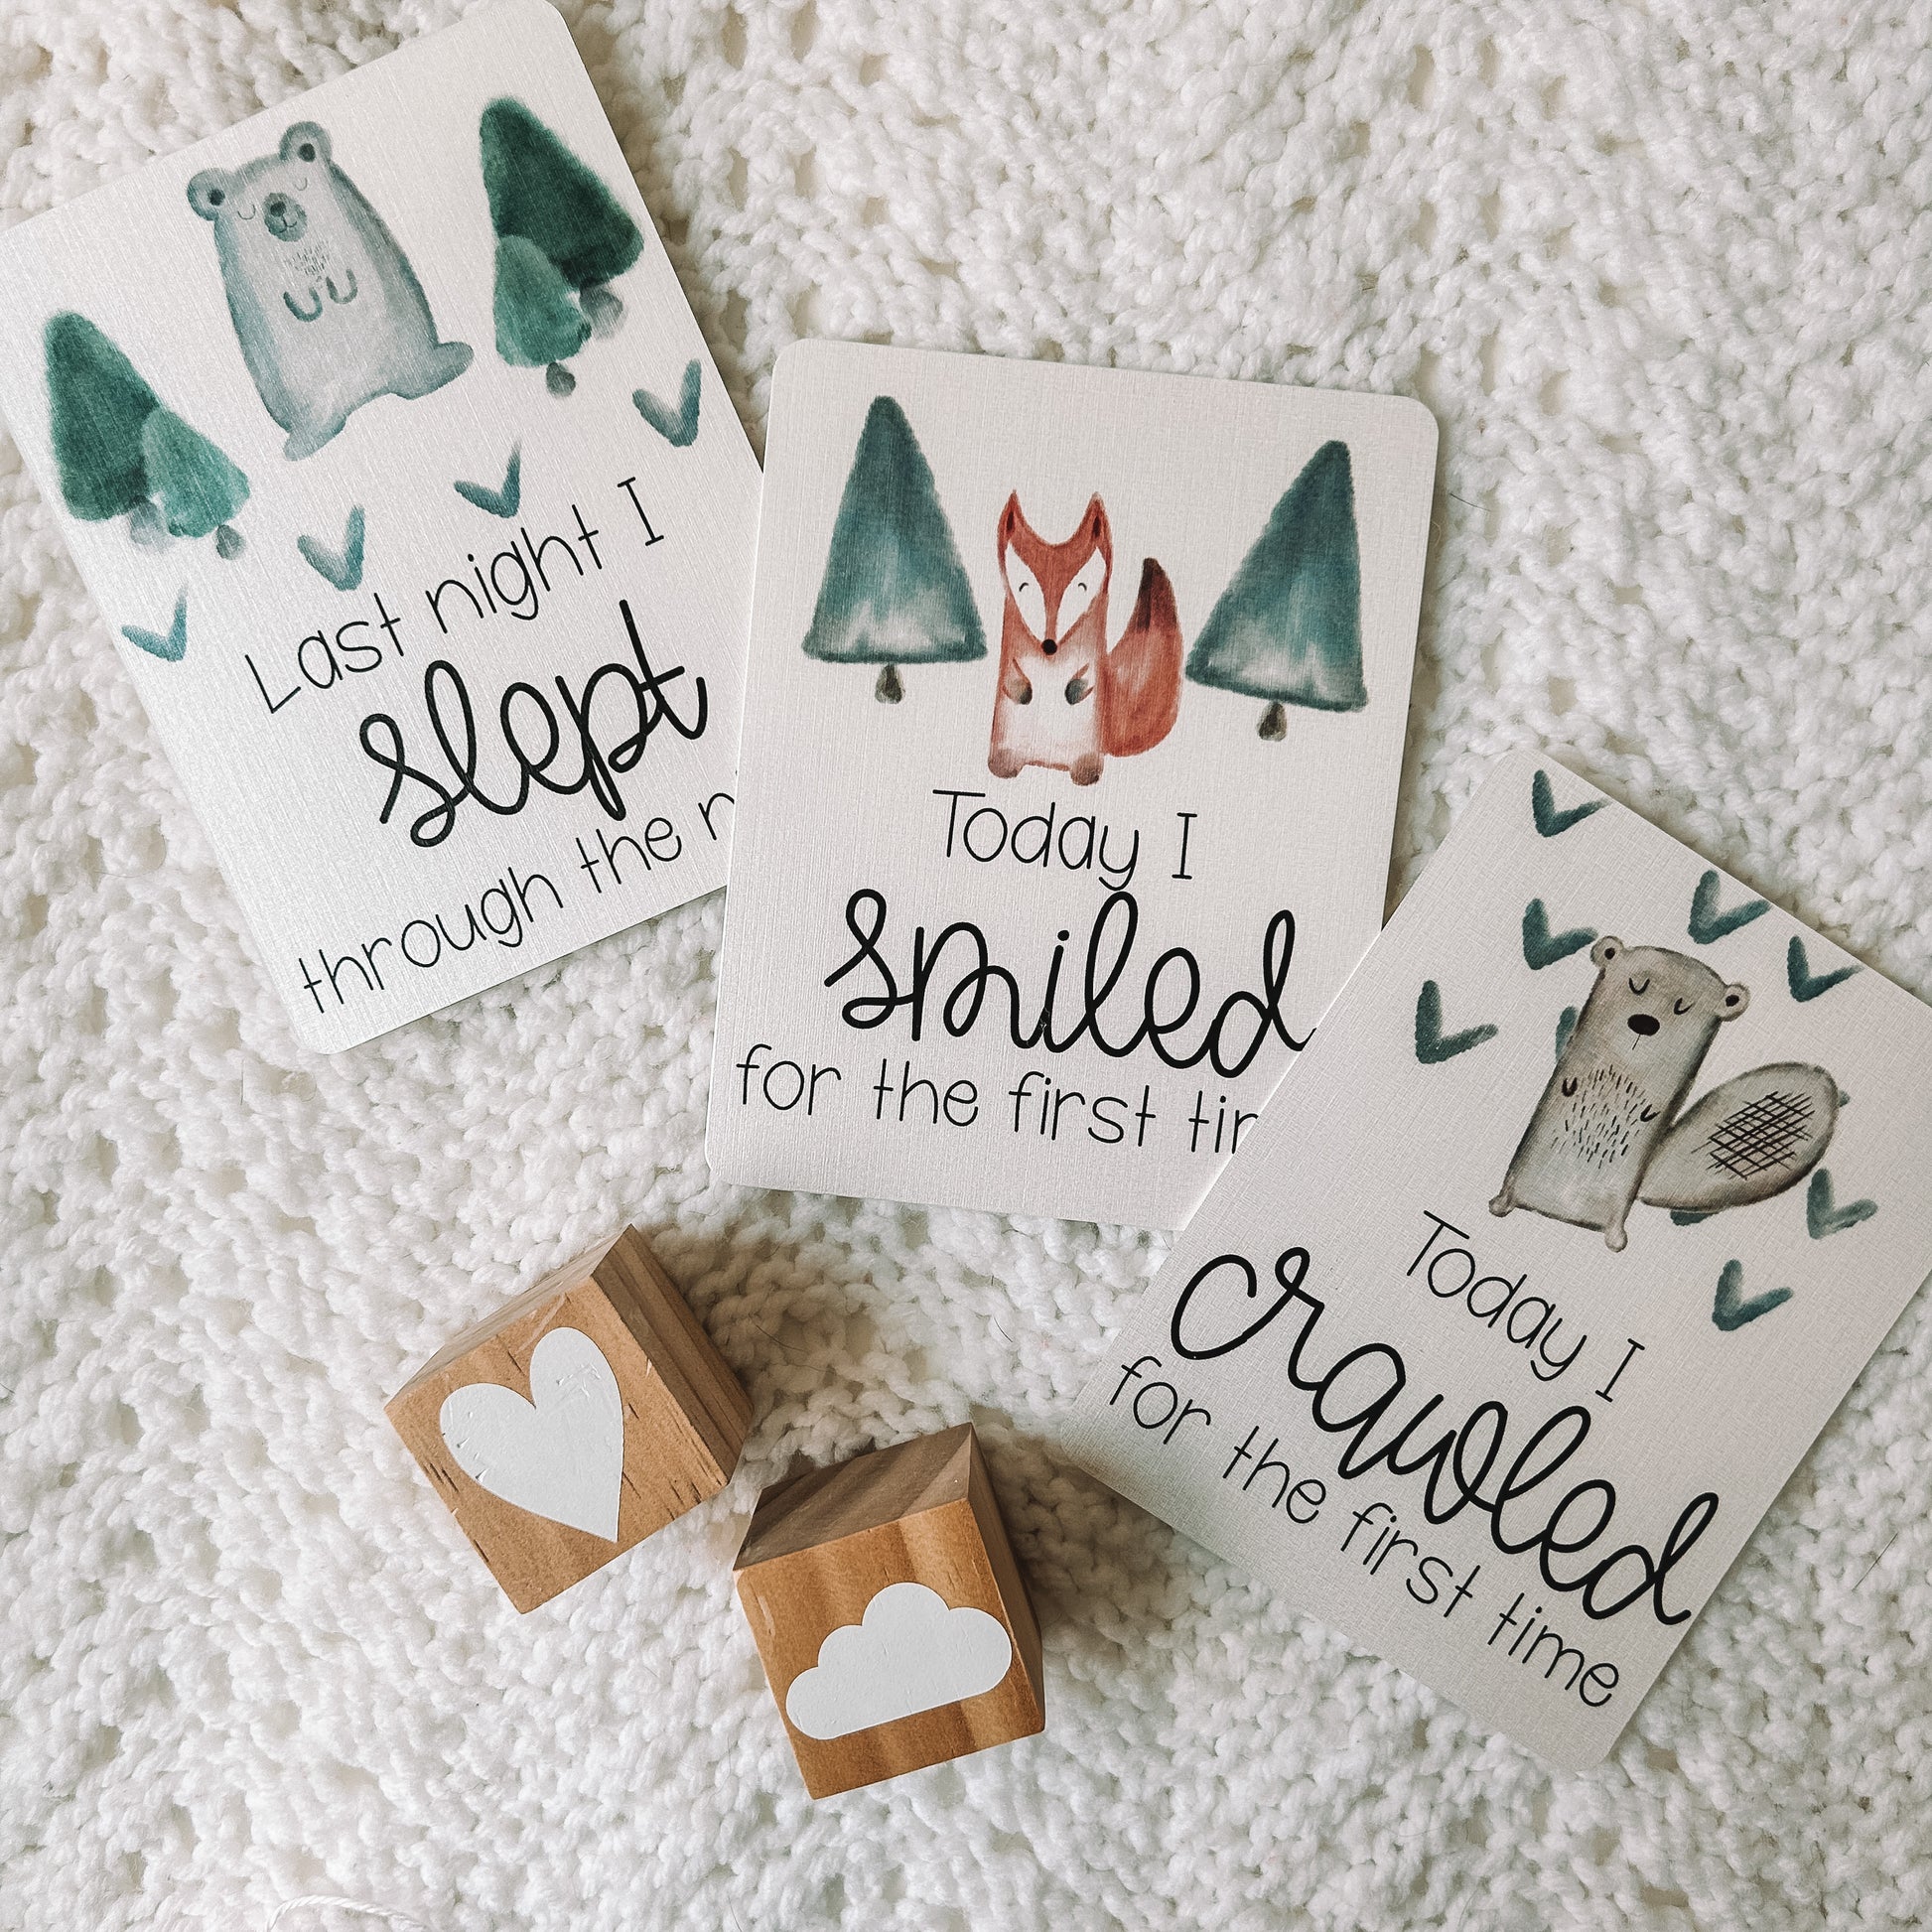 last night I slept through the night, today I smiled for the first time, and today I crawled for the first time milestone cards. Woodland animals and trees or hearts above the text